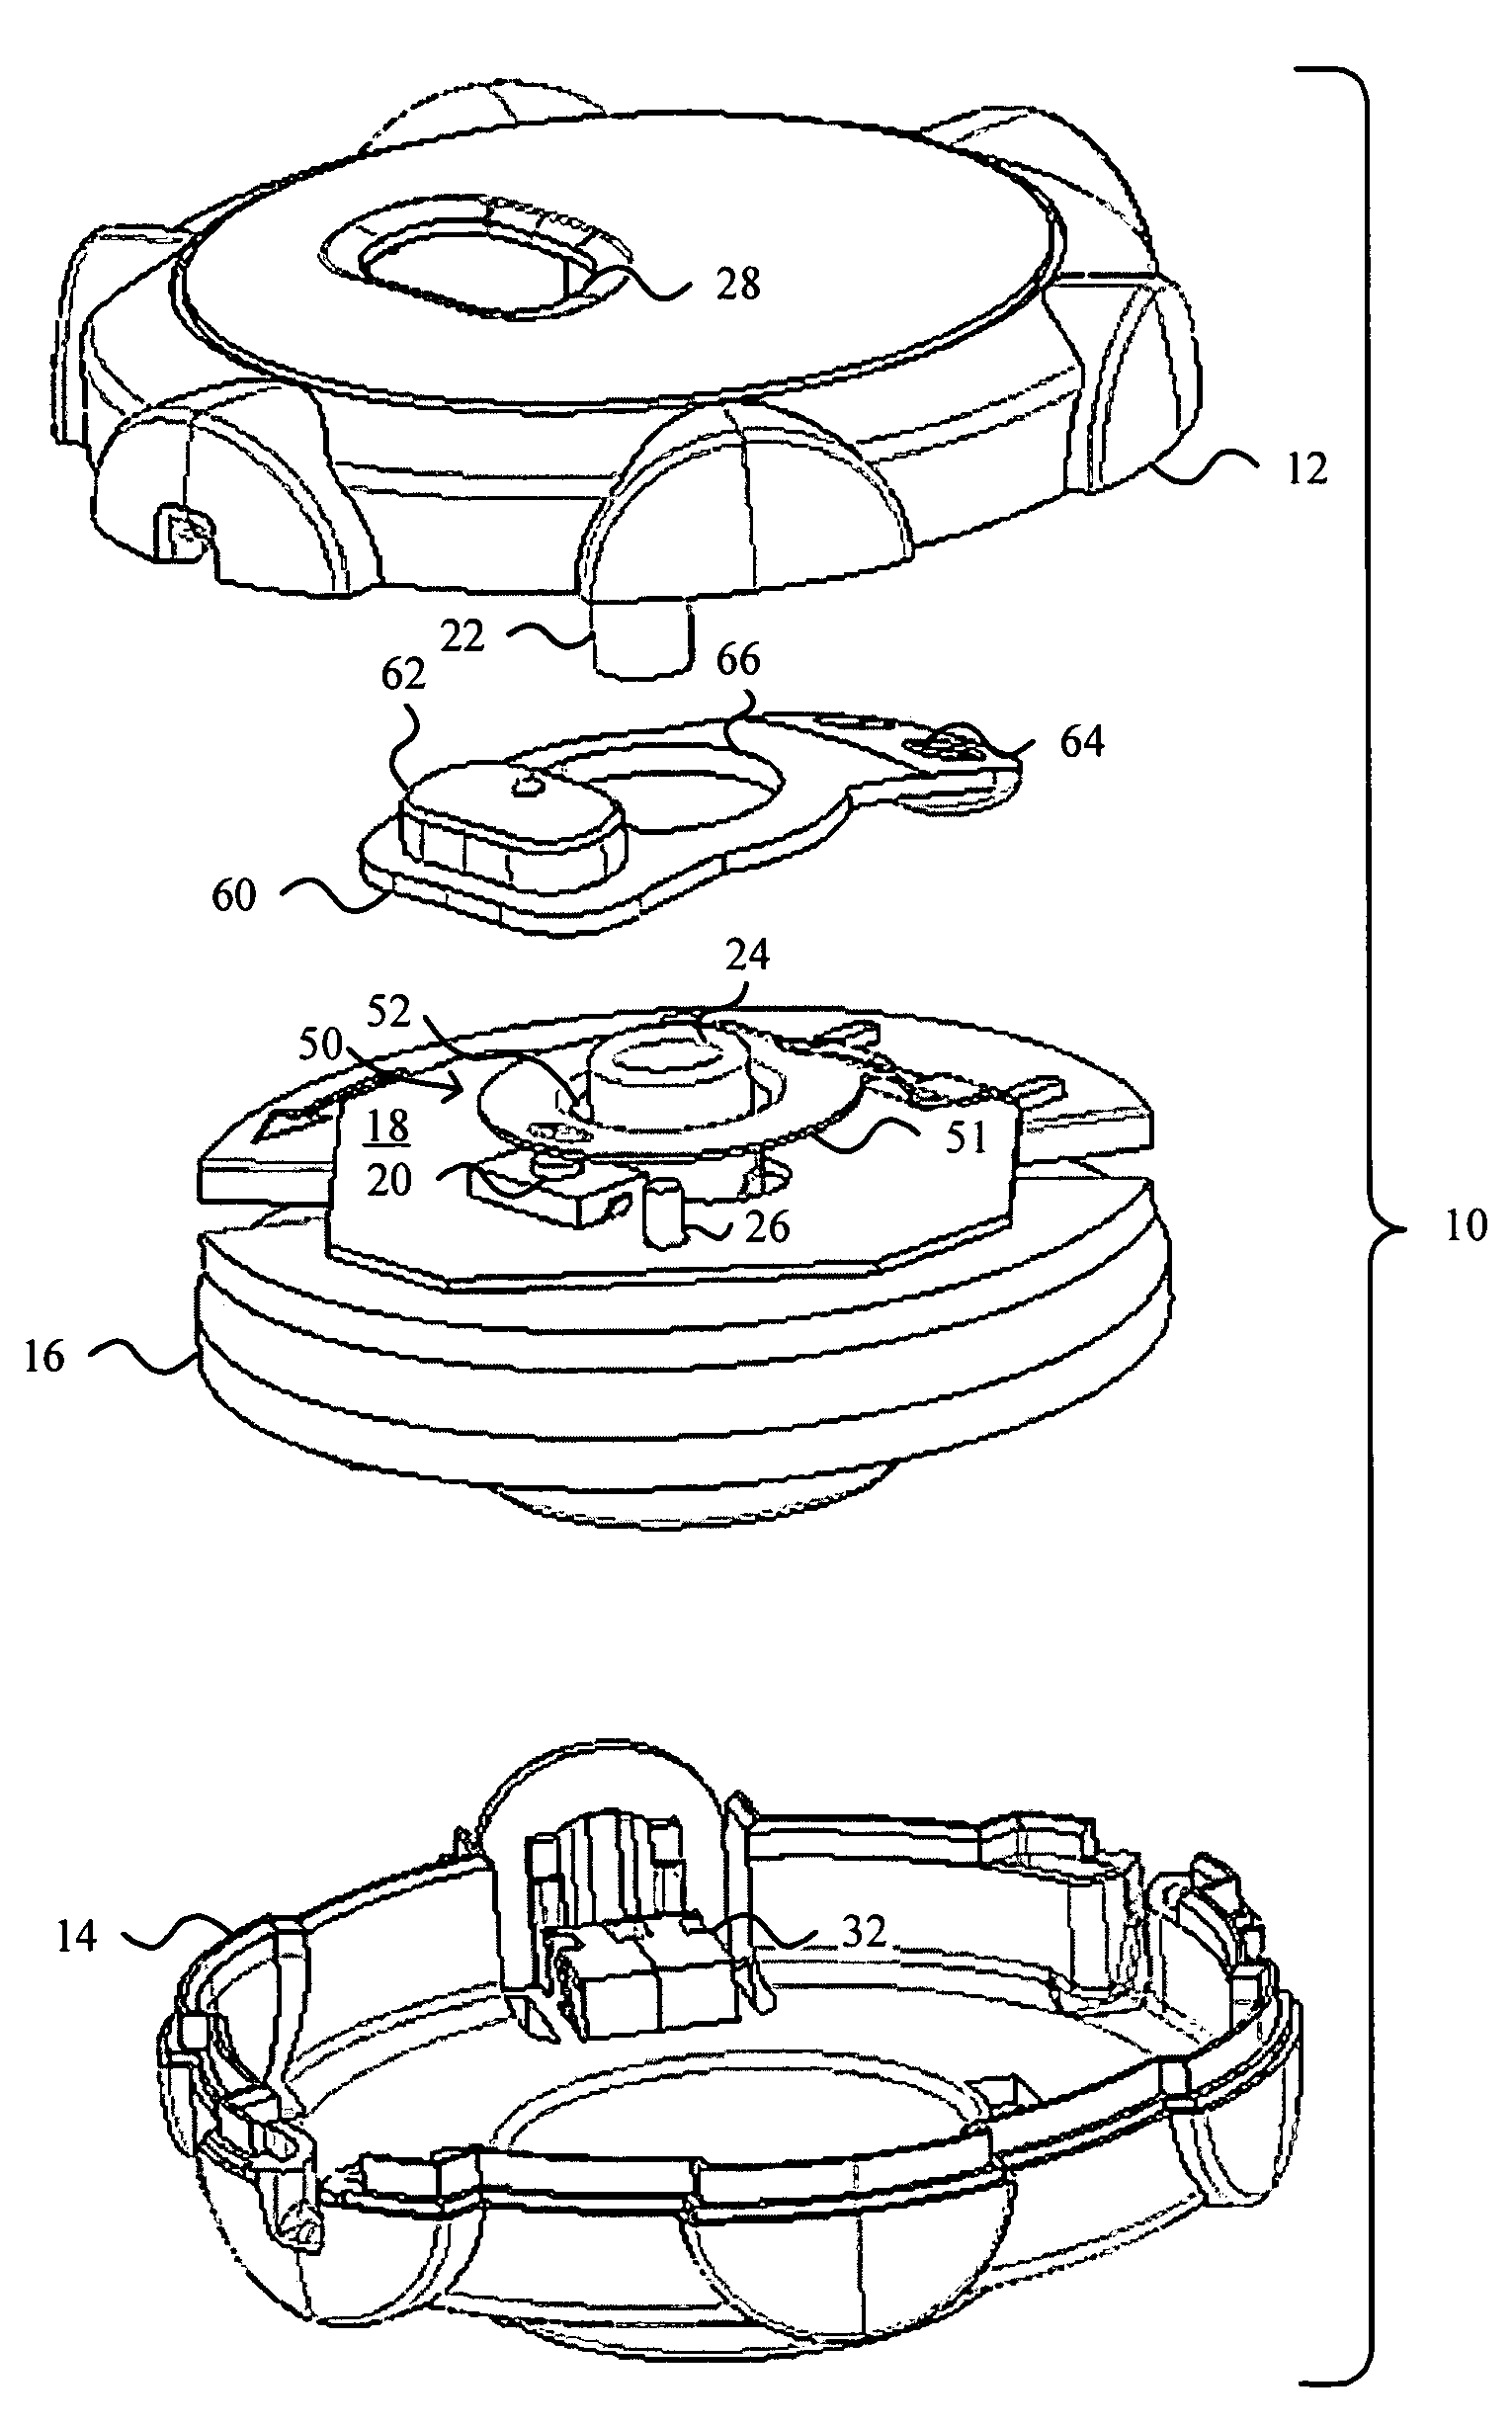 Cable winding device with clocked keycap and revolving electrical switch